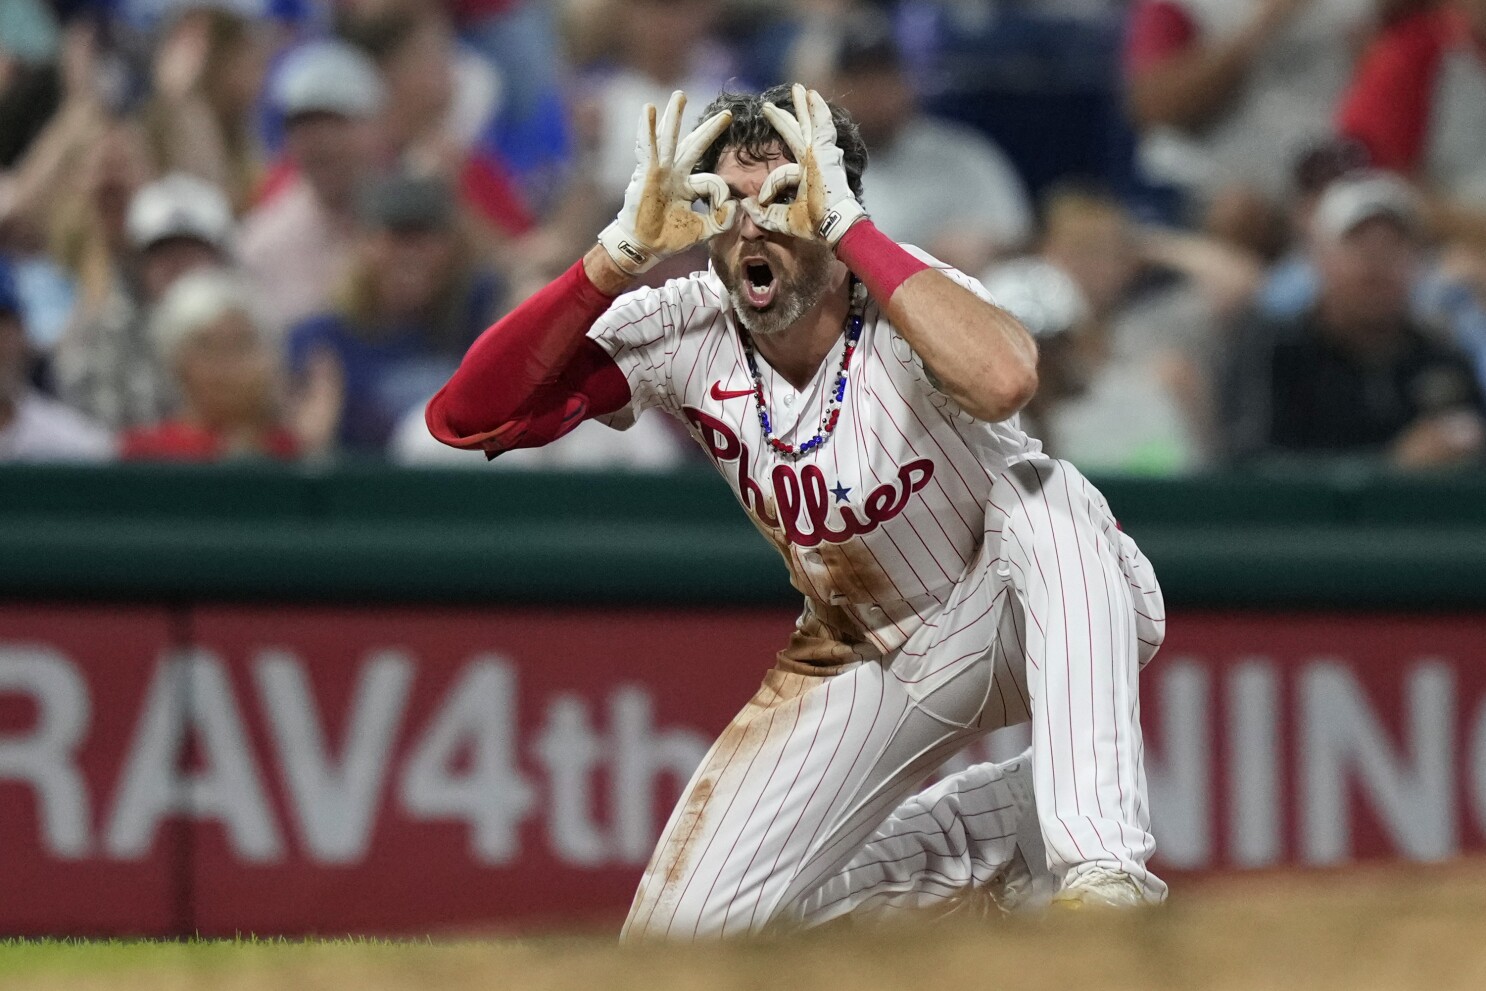 Phillies are on a 11-game road roll, and Rays are latest to fall, 8-4